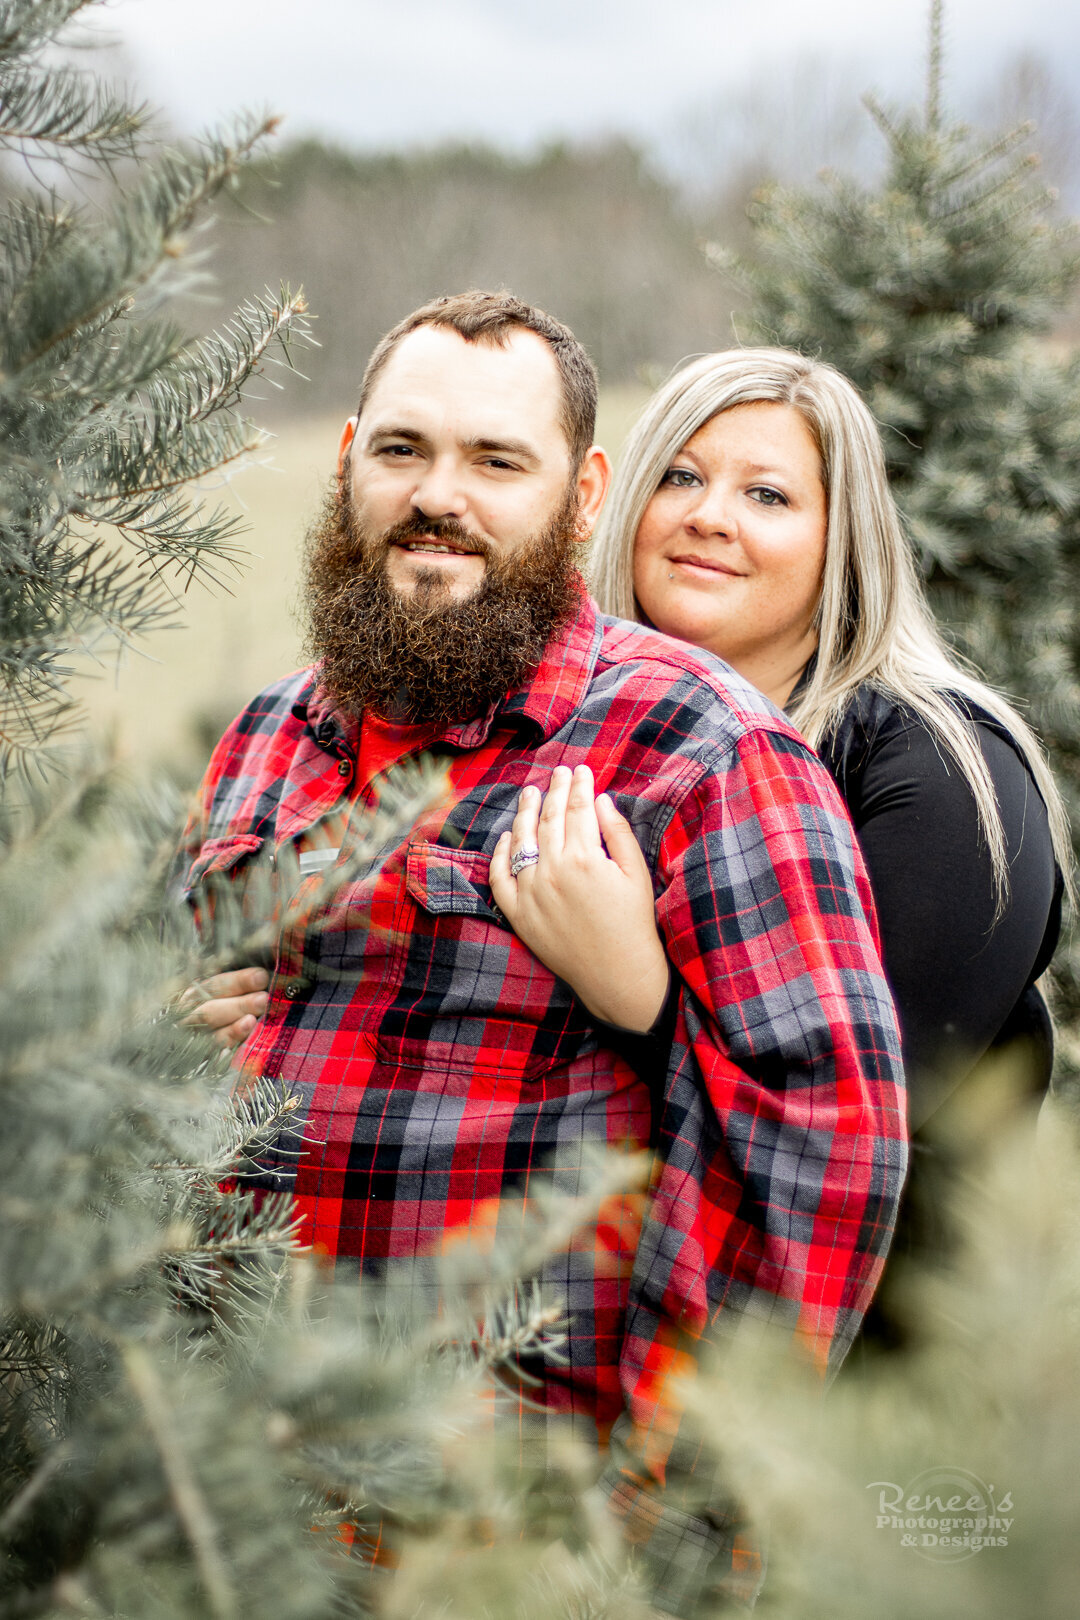 renees-photography-and-designs_christmas-tree-farm_family-children-photoshoot_new-river-valley_blue-ridge-mountains-sm-1742